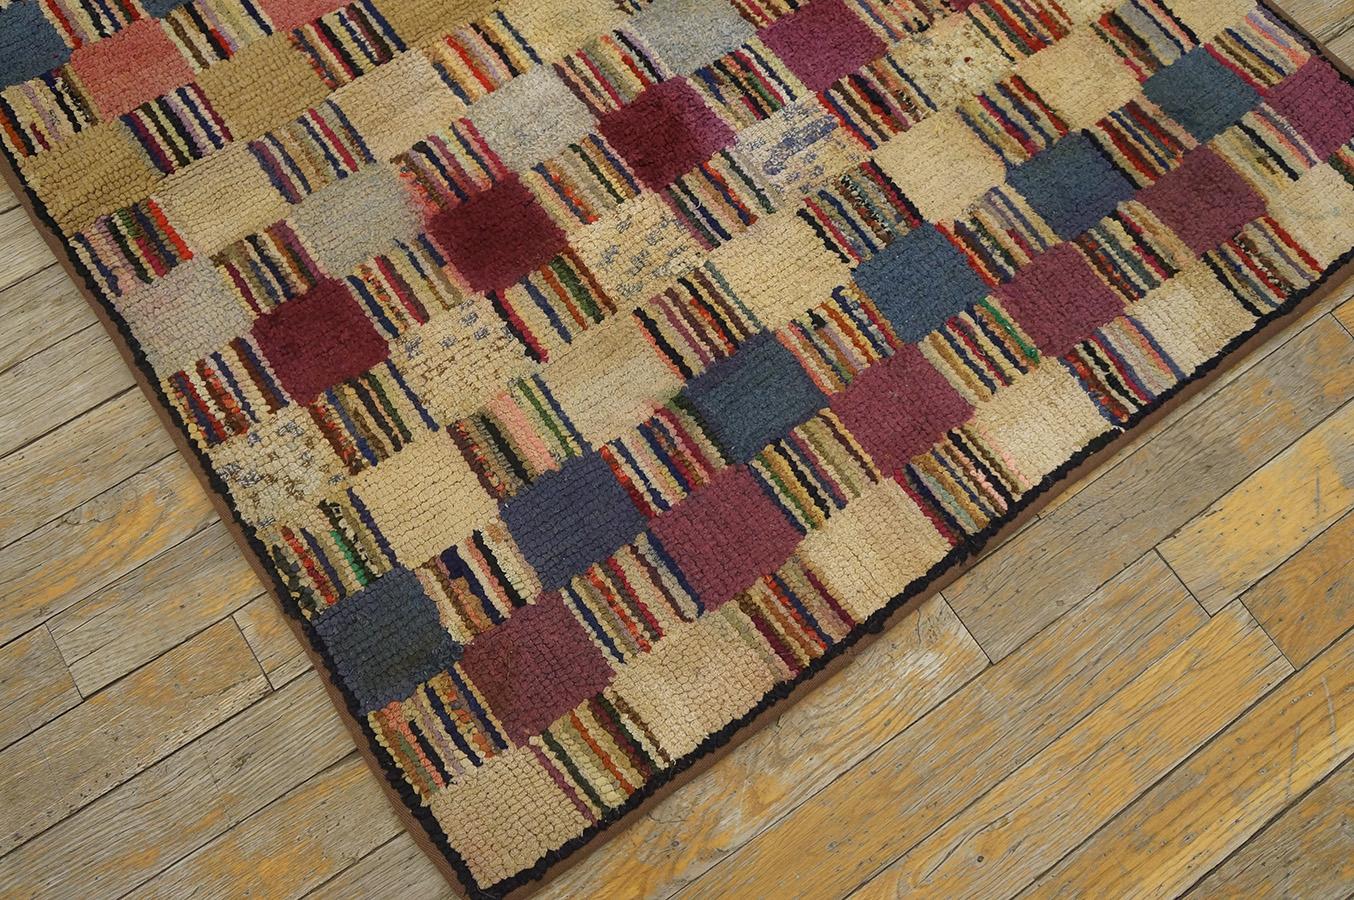 Antique American Hooked Rug 3'3